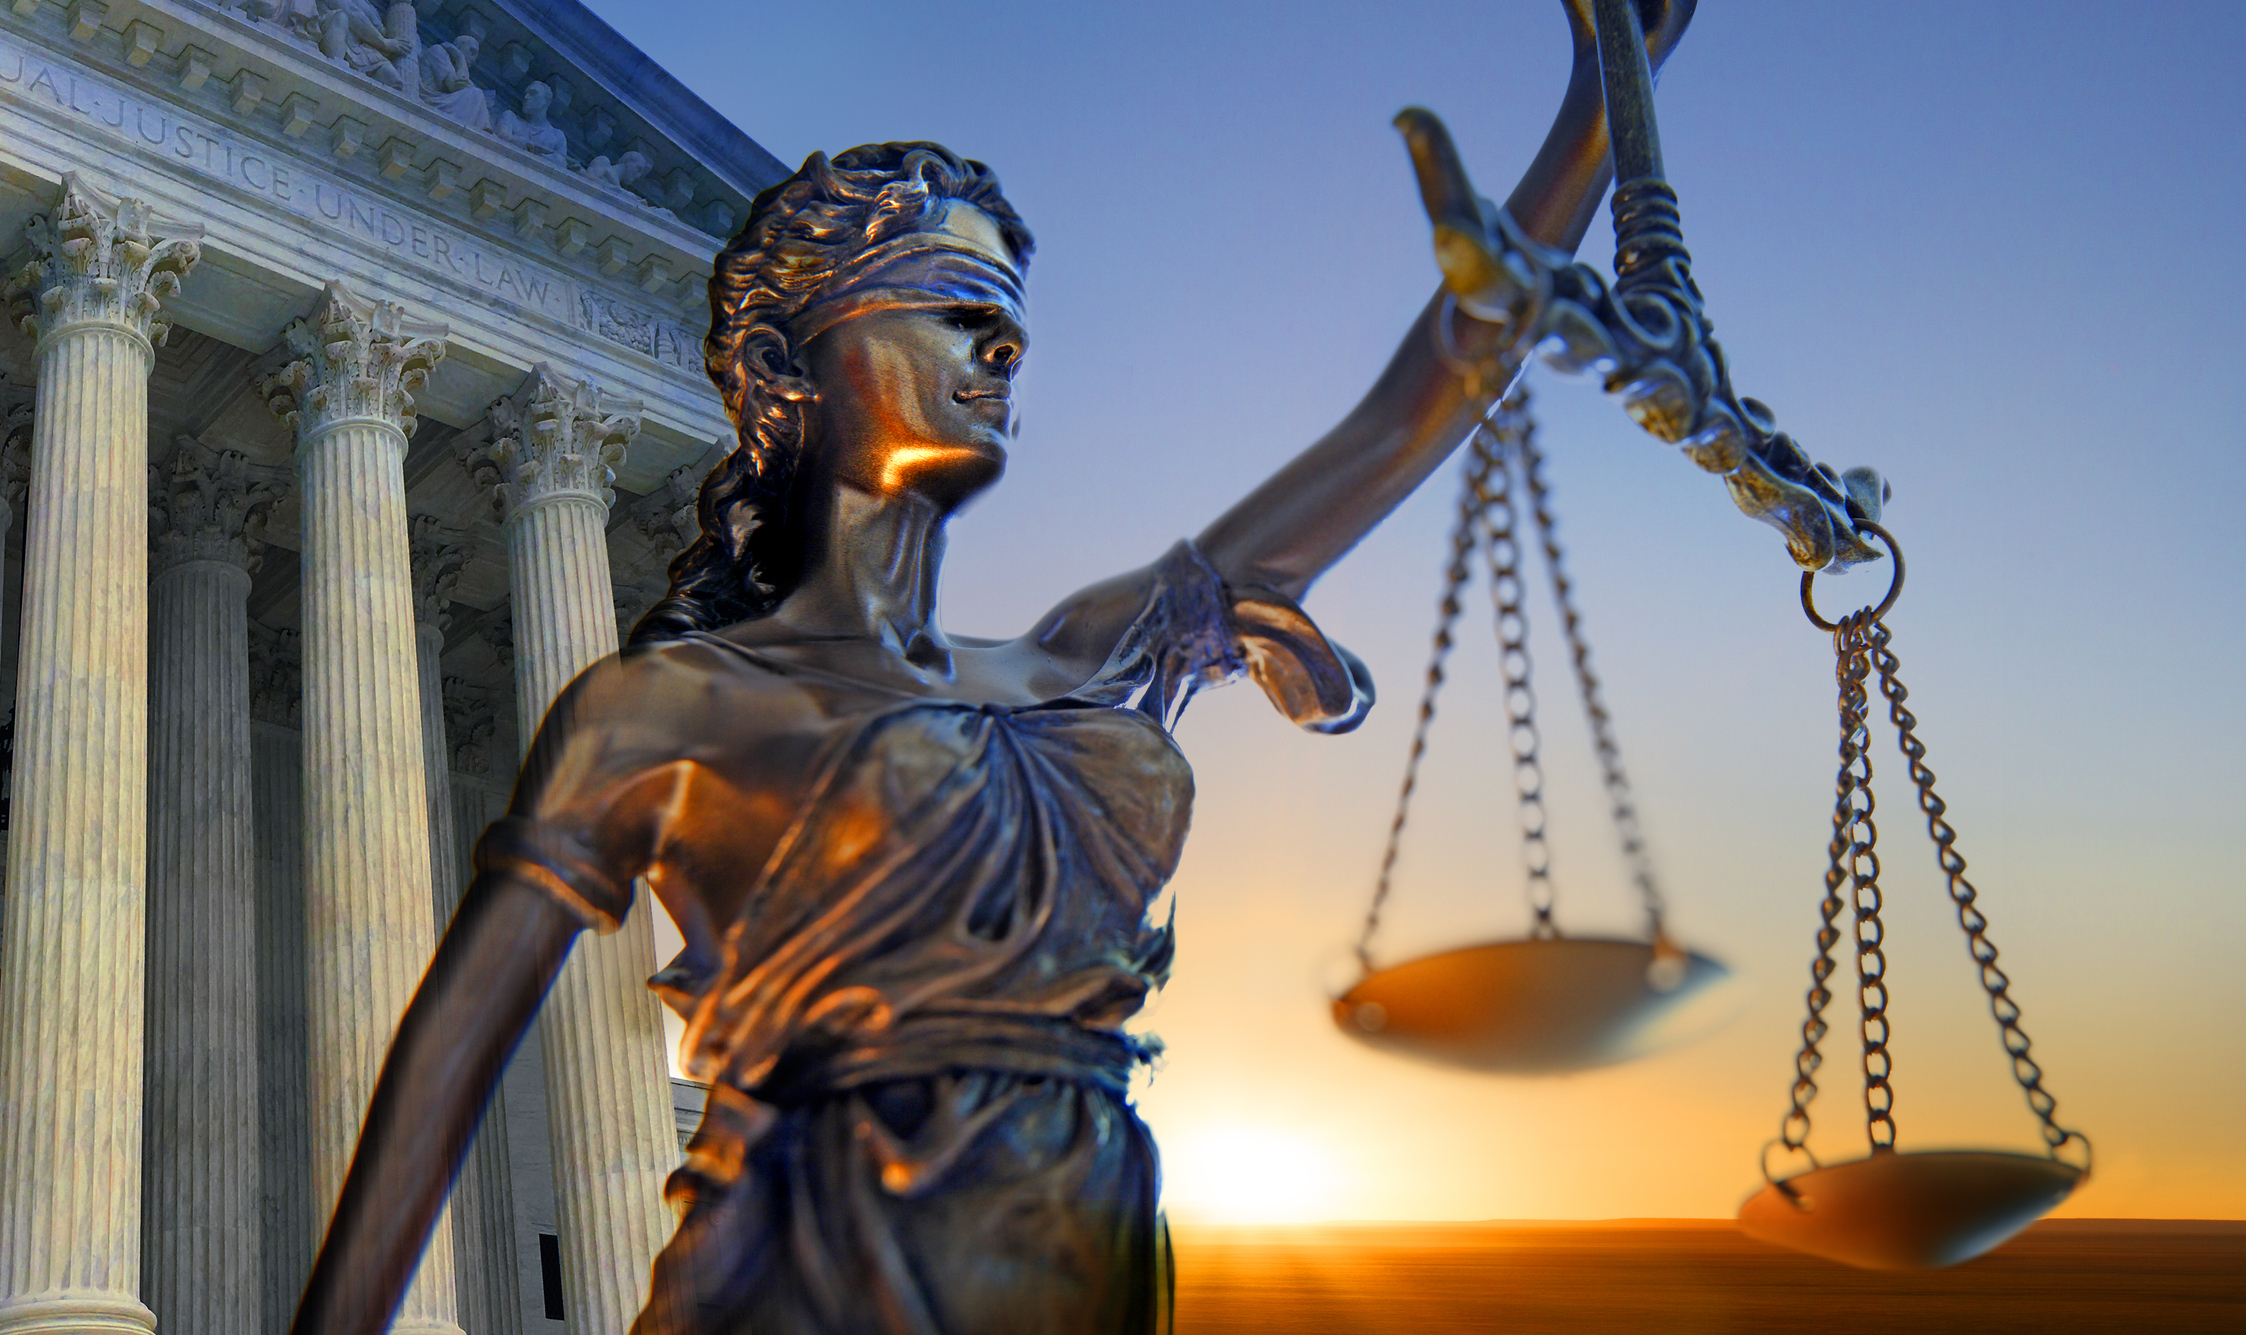 Lady justice image